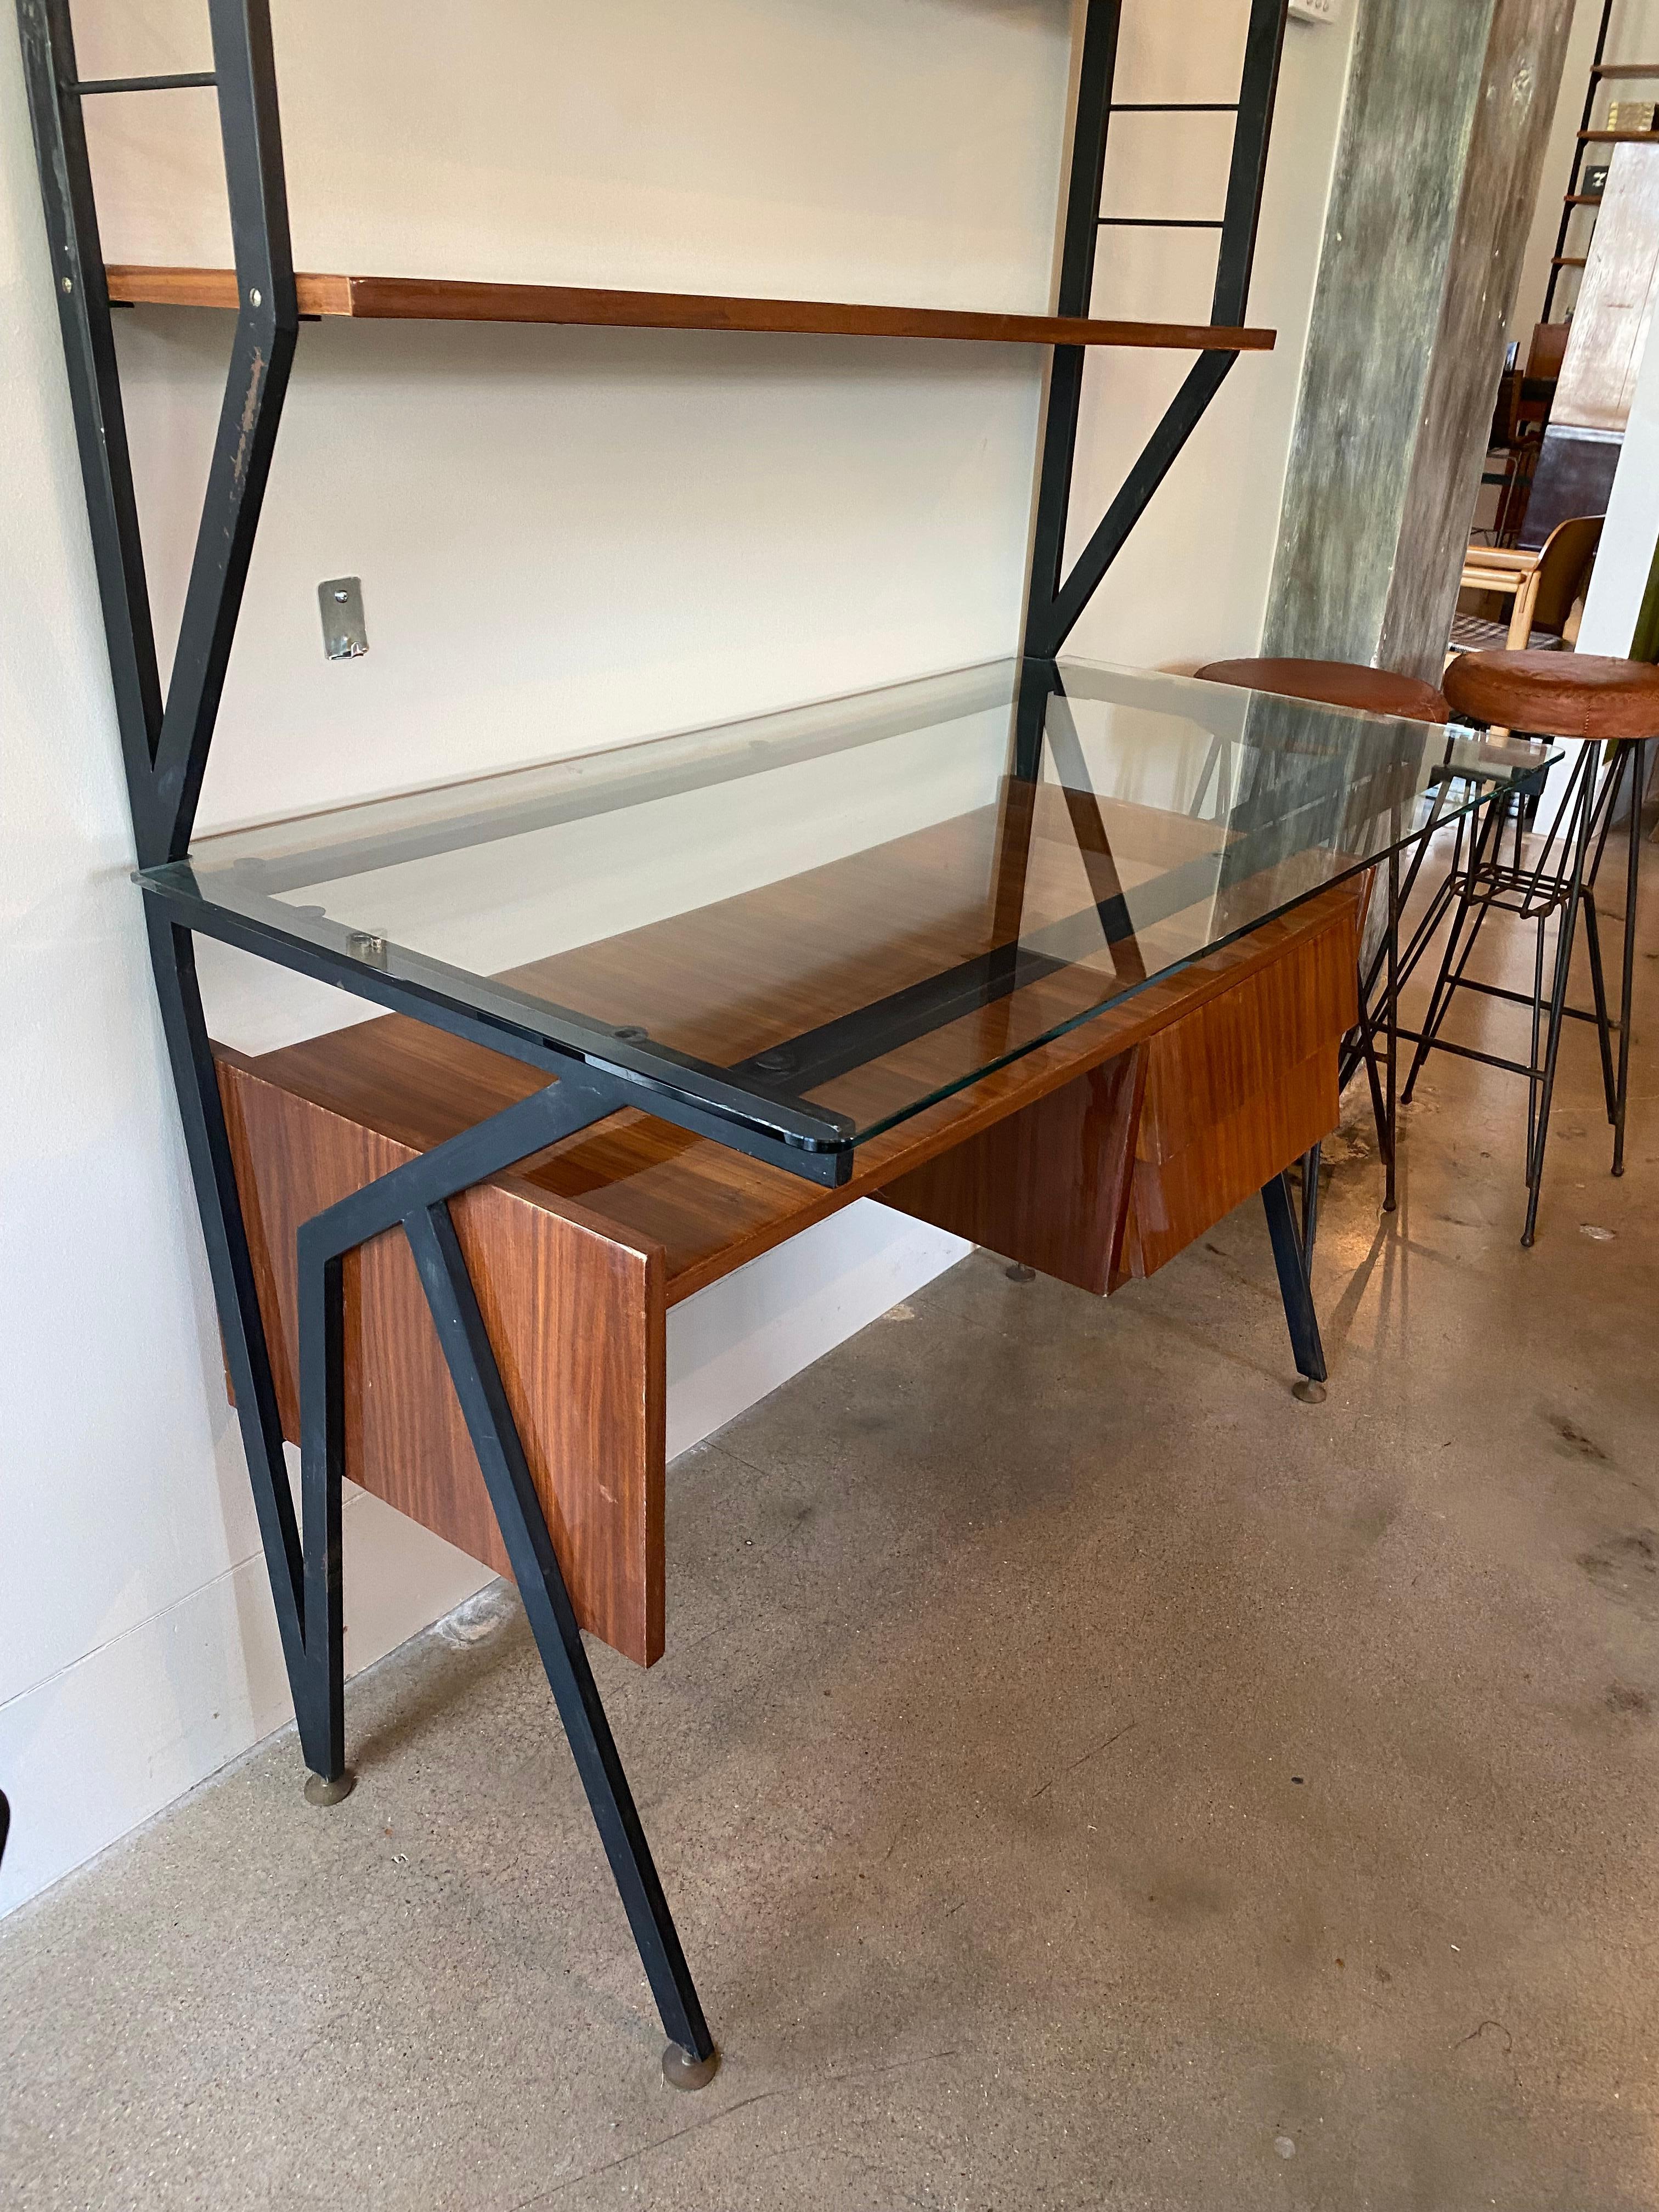 Italian Mid-Century Modern Desk with Shelves, Style of Ico Parisi For Sale 8